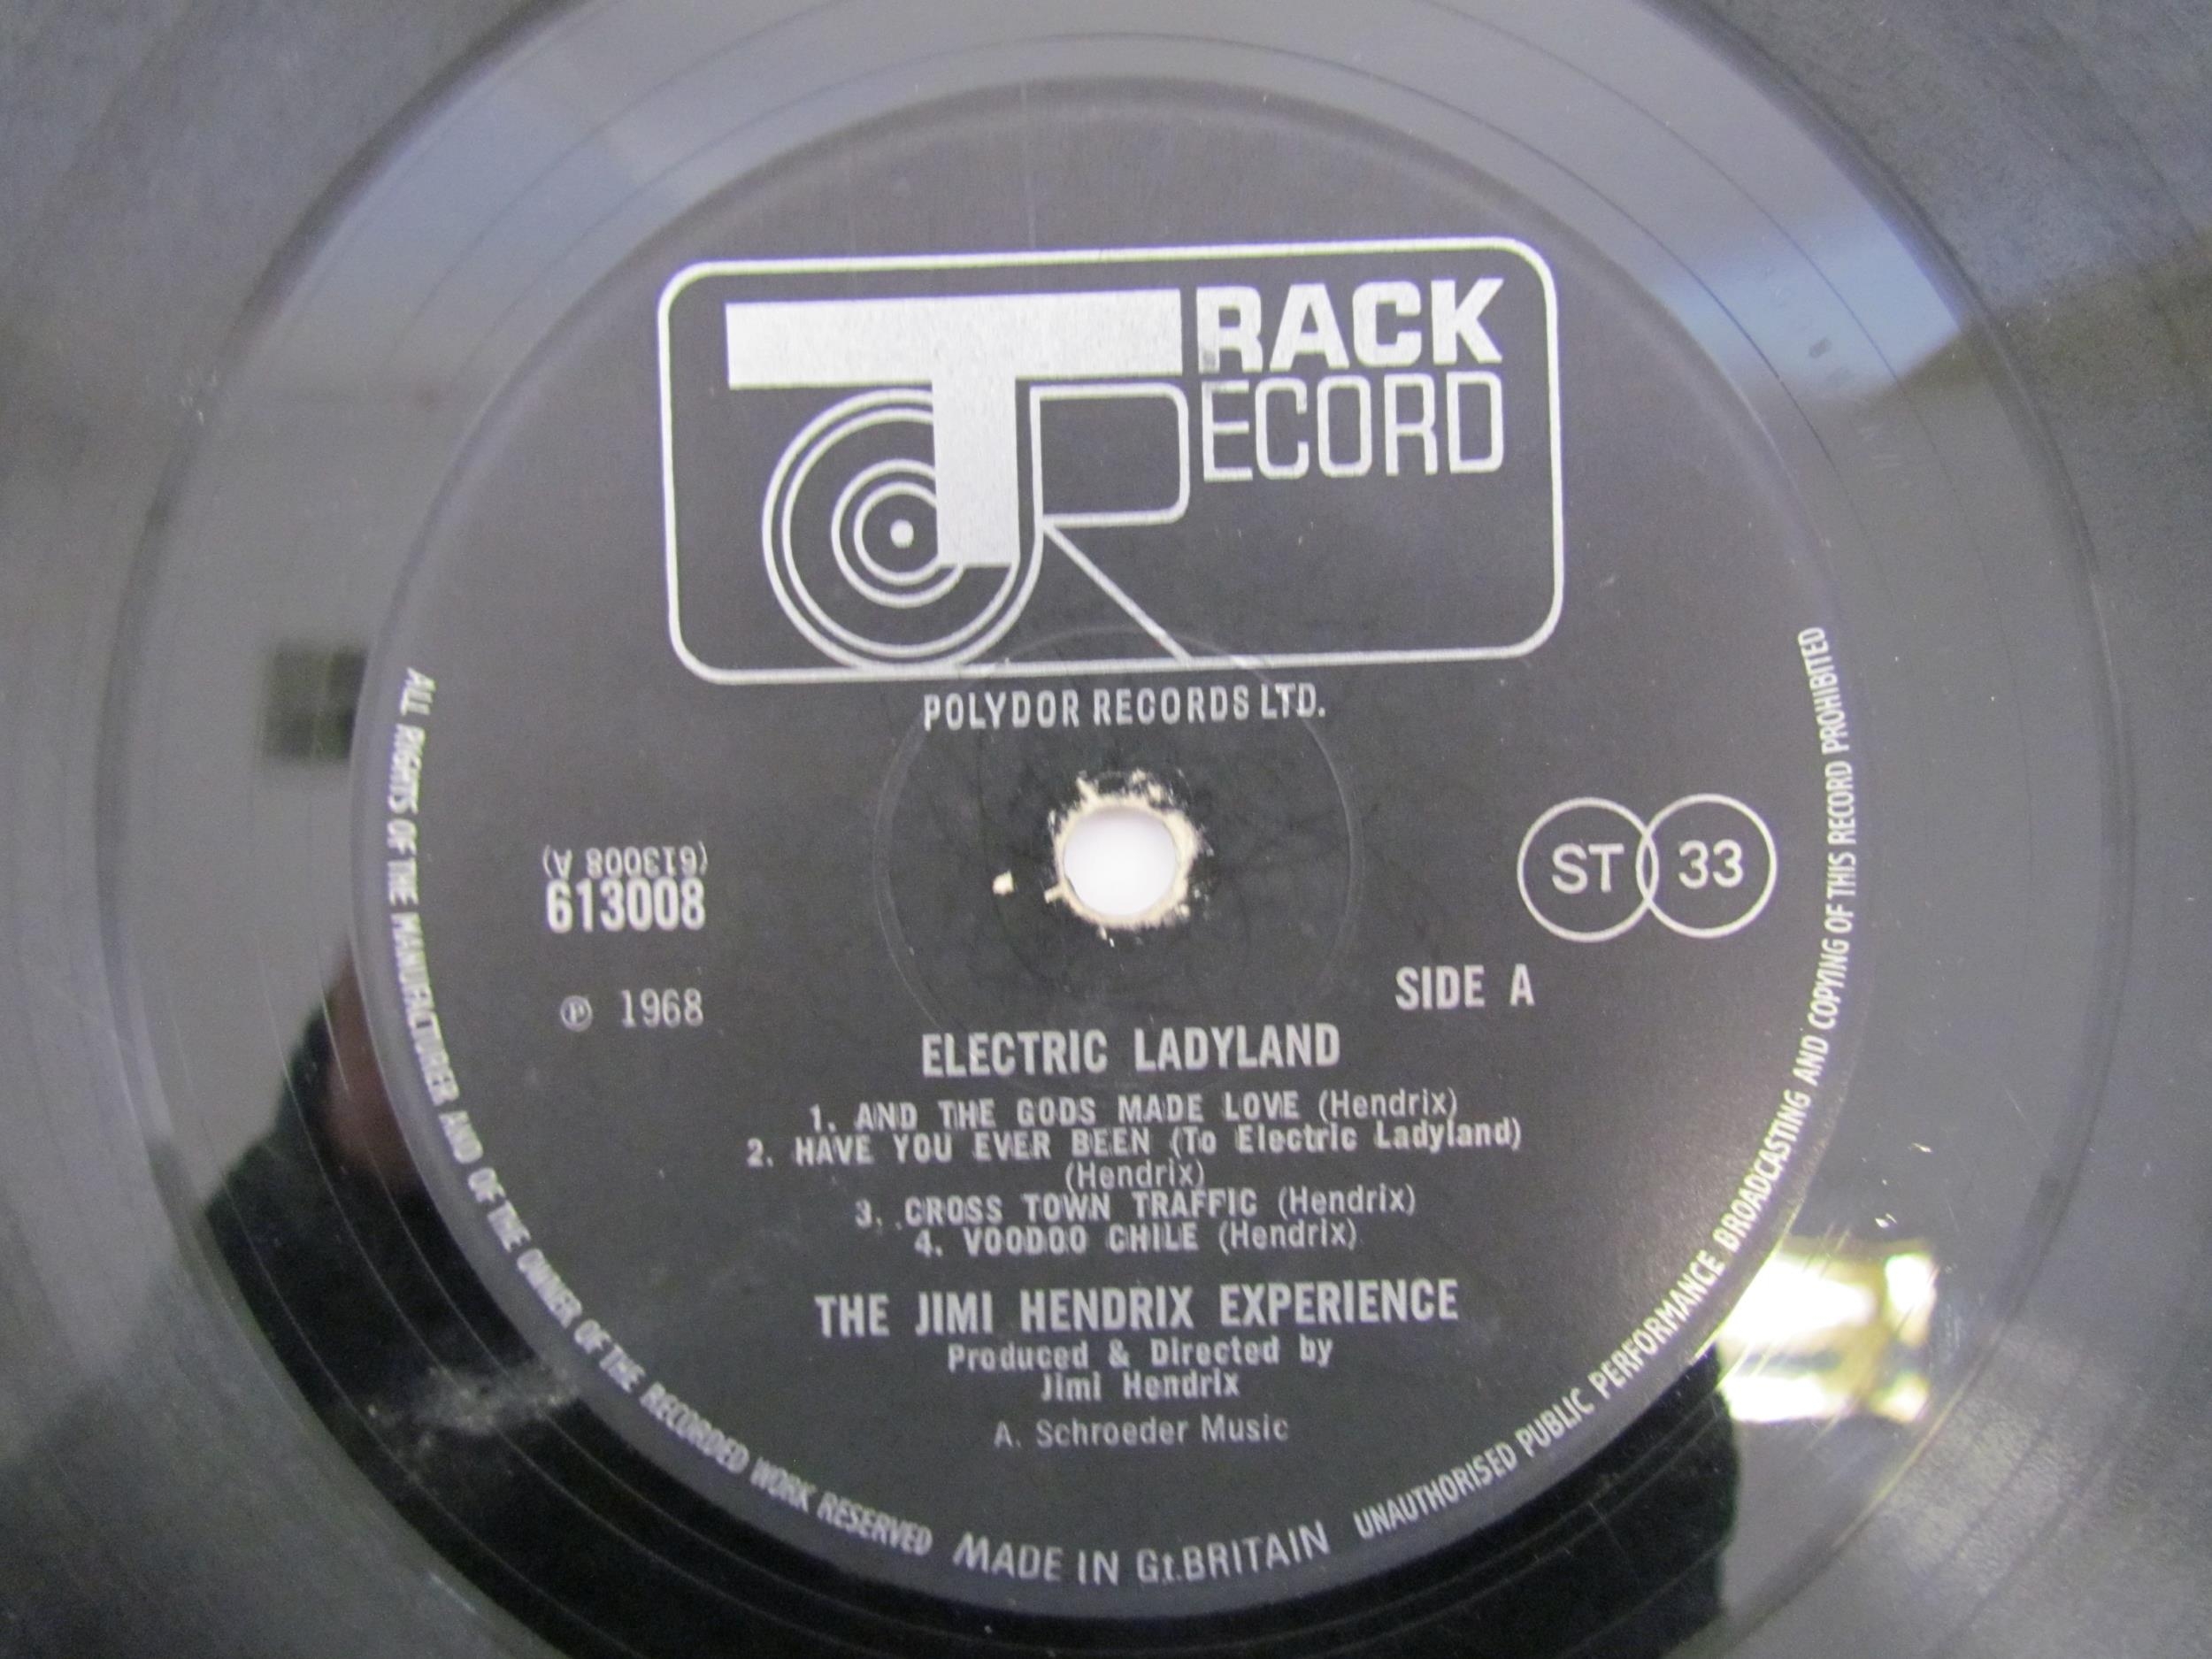 THE JIMI HENDRIX EXPERIENCE: 'Electric Ladyland' double LP, original UK pressing on Track Record, - Image 7 of 9